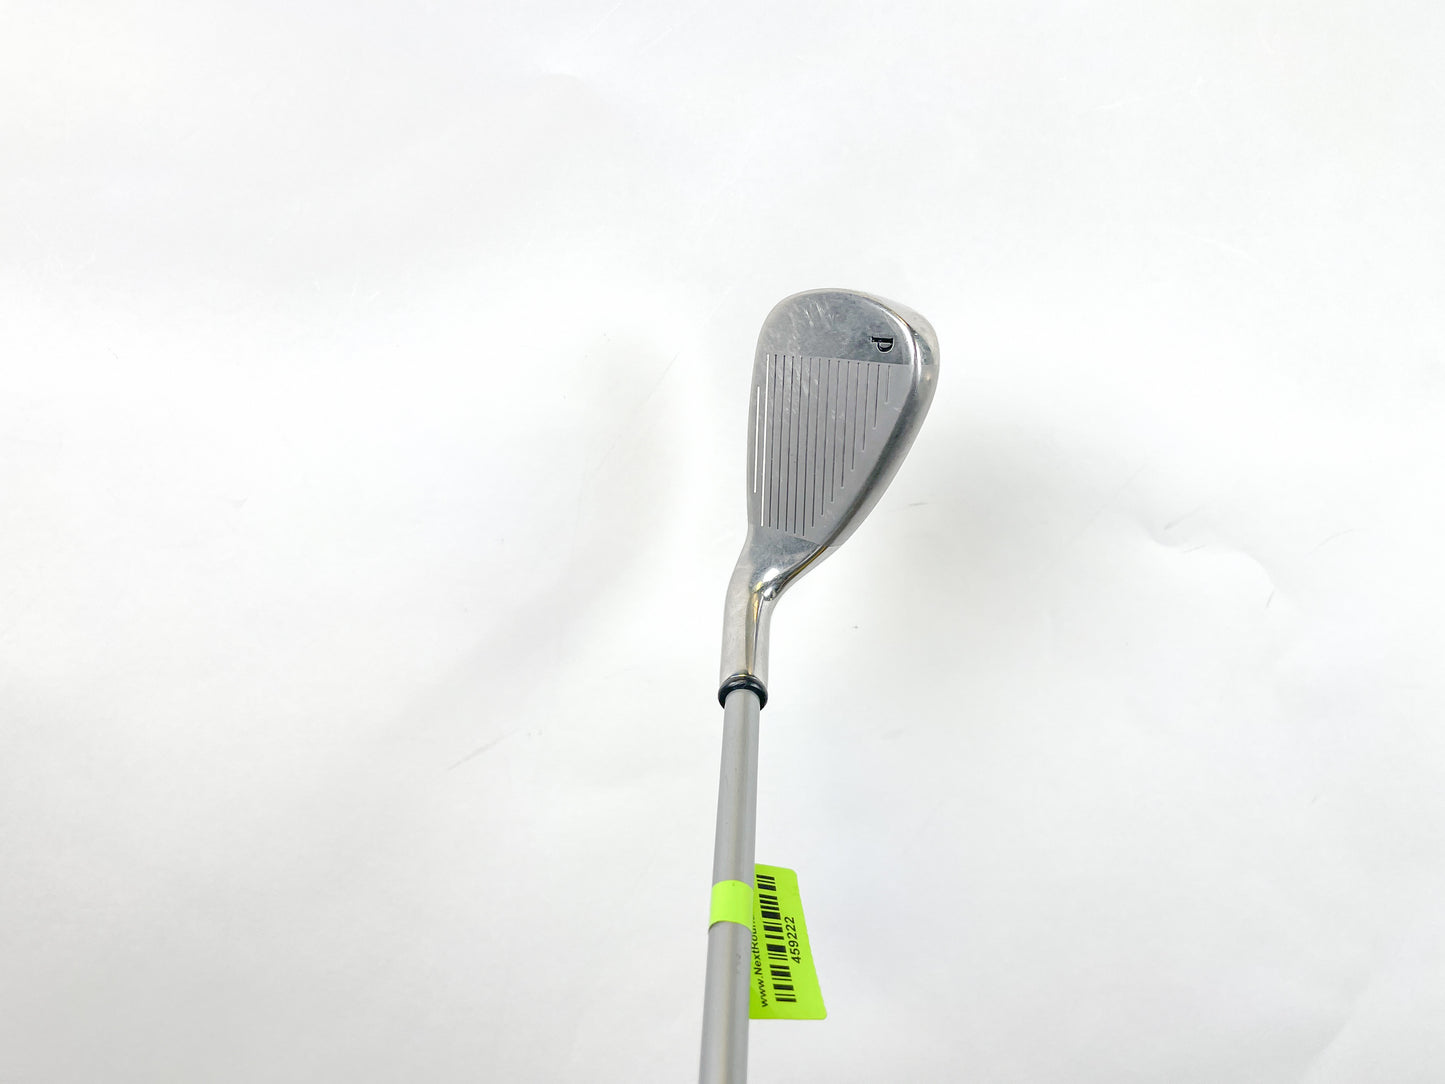 Used Callaway Big Bertha 2008 Pitching Wedge - Right-Handed - 45 Degrees - Ladies Flex-Next Round